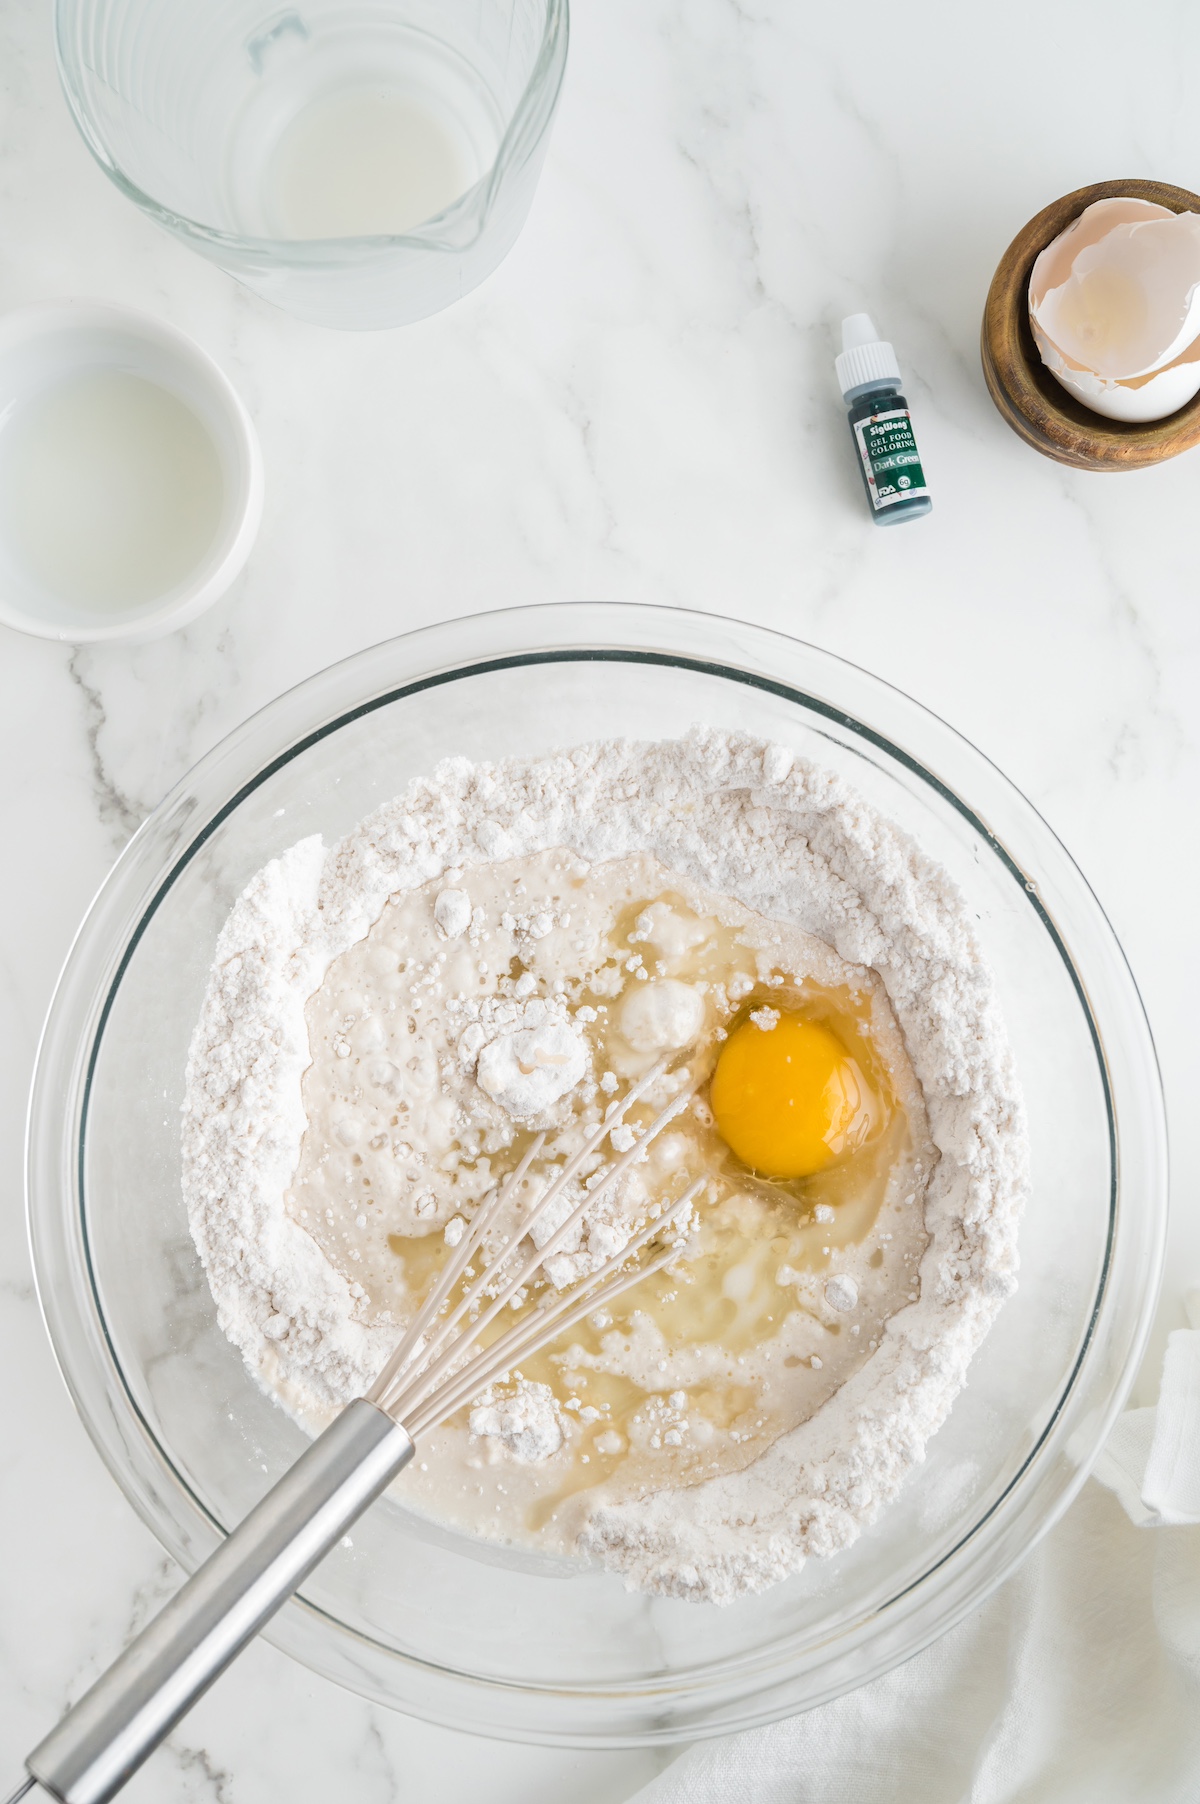 Mix the eggs, milk, and oil into the dry ingredients